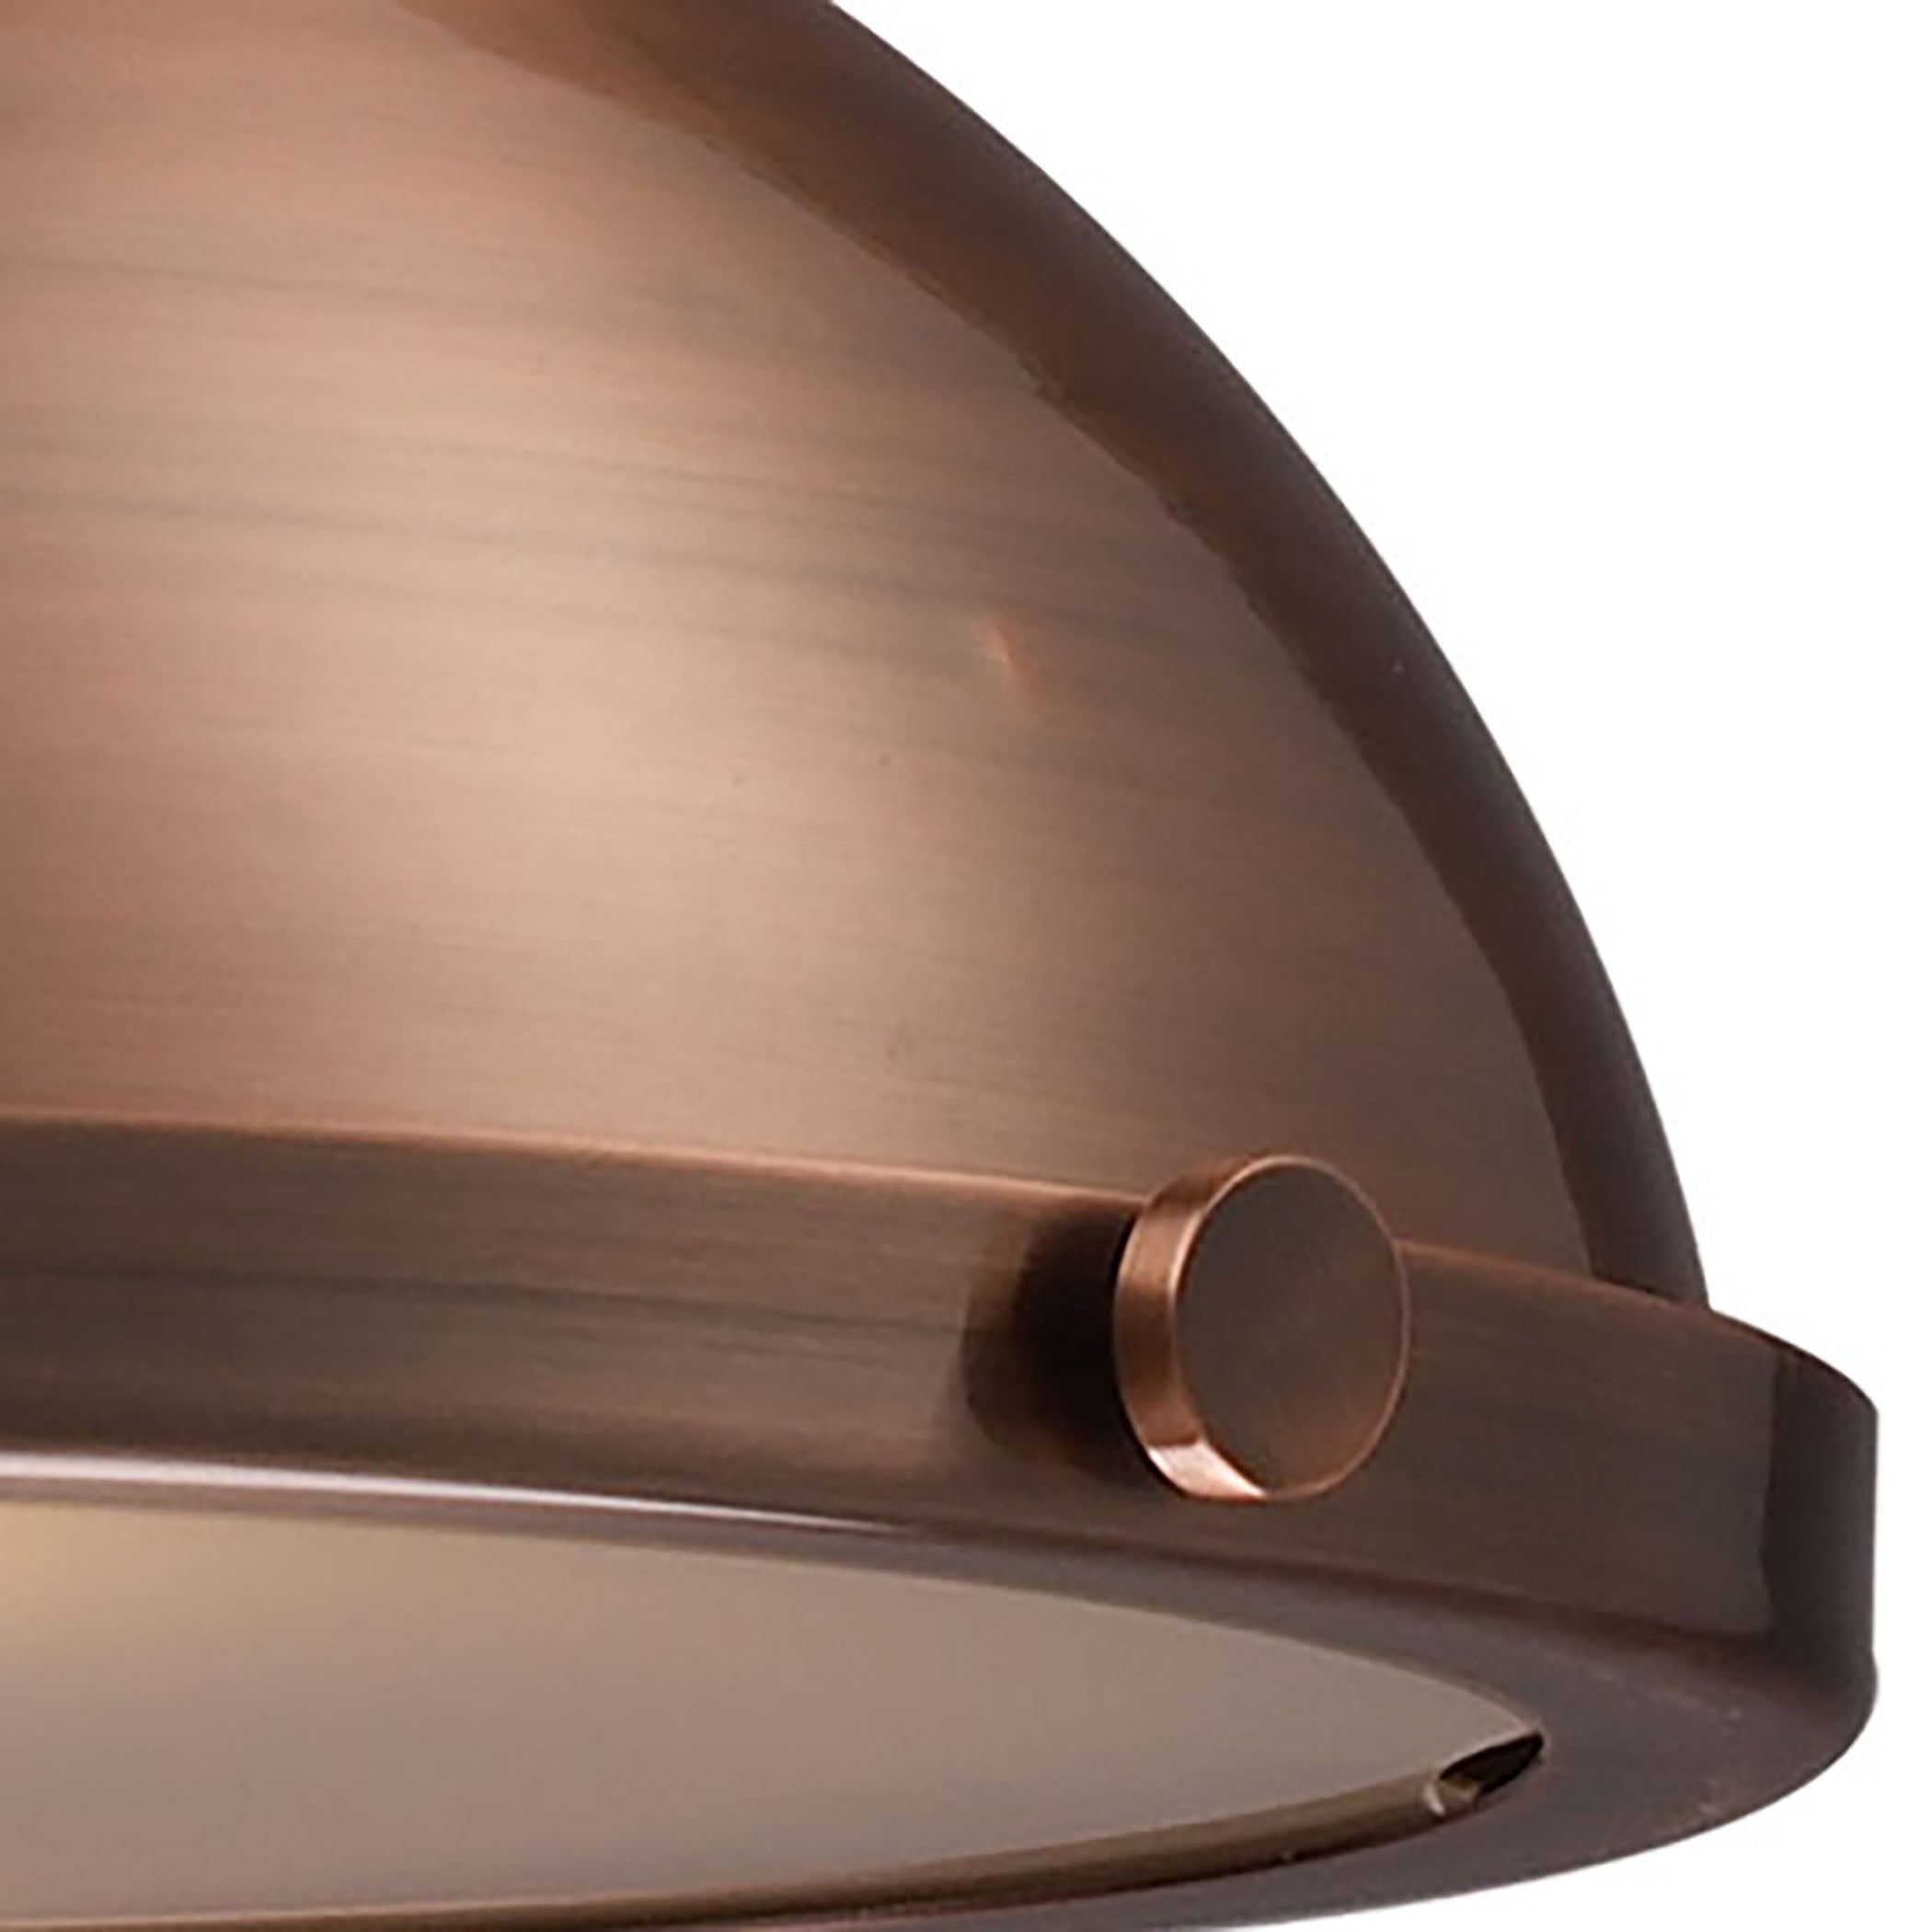 ELK Lighting 66144-1 Chadwick 1-Light Pendant in Antique Copper with Matching Shade